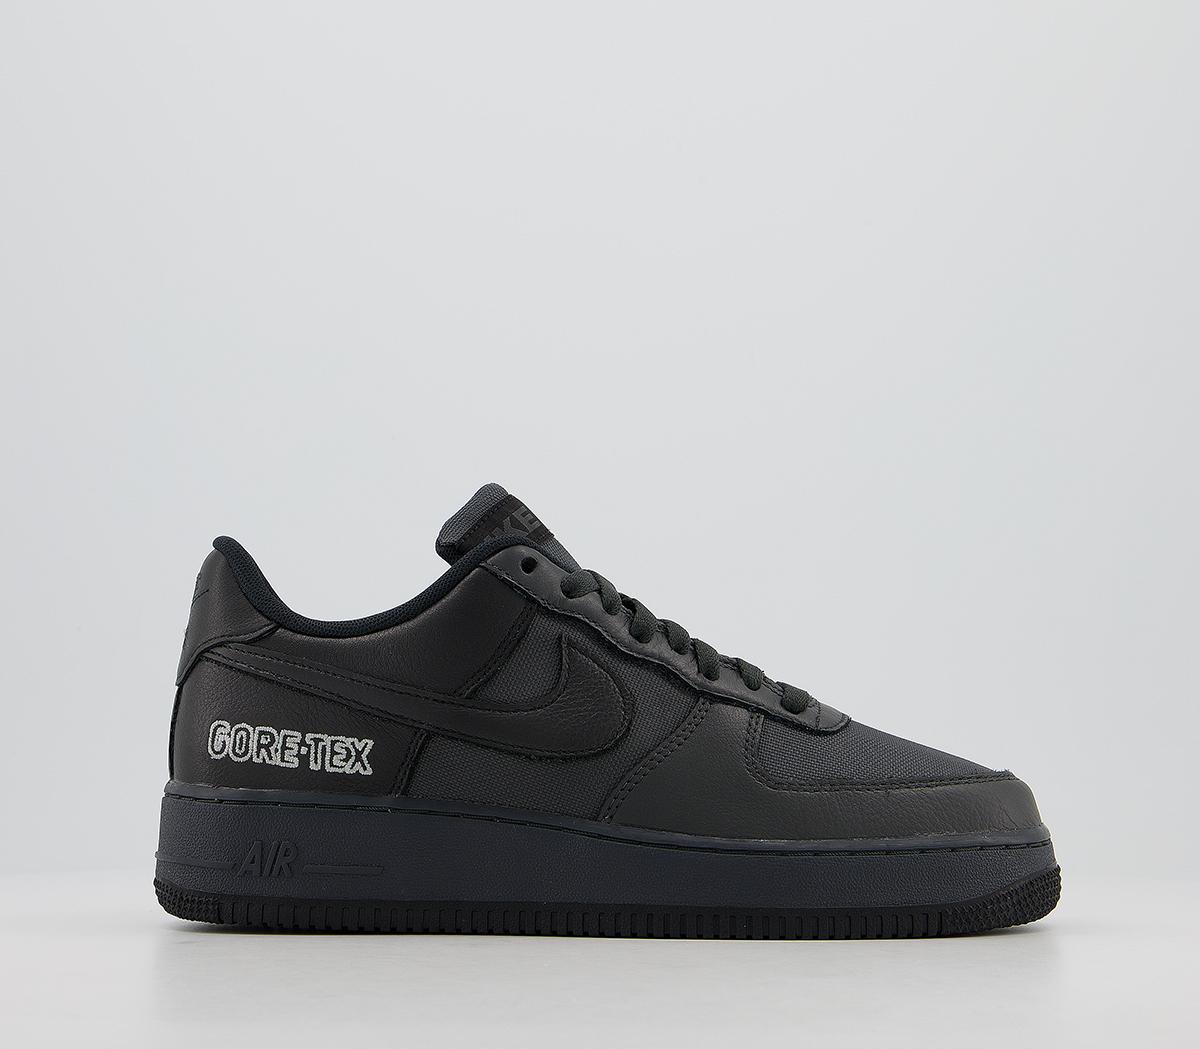 NikeAir Force 1 Gtx TrainersAnthracite Black Barely Grey